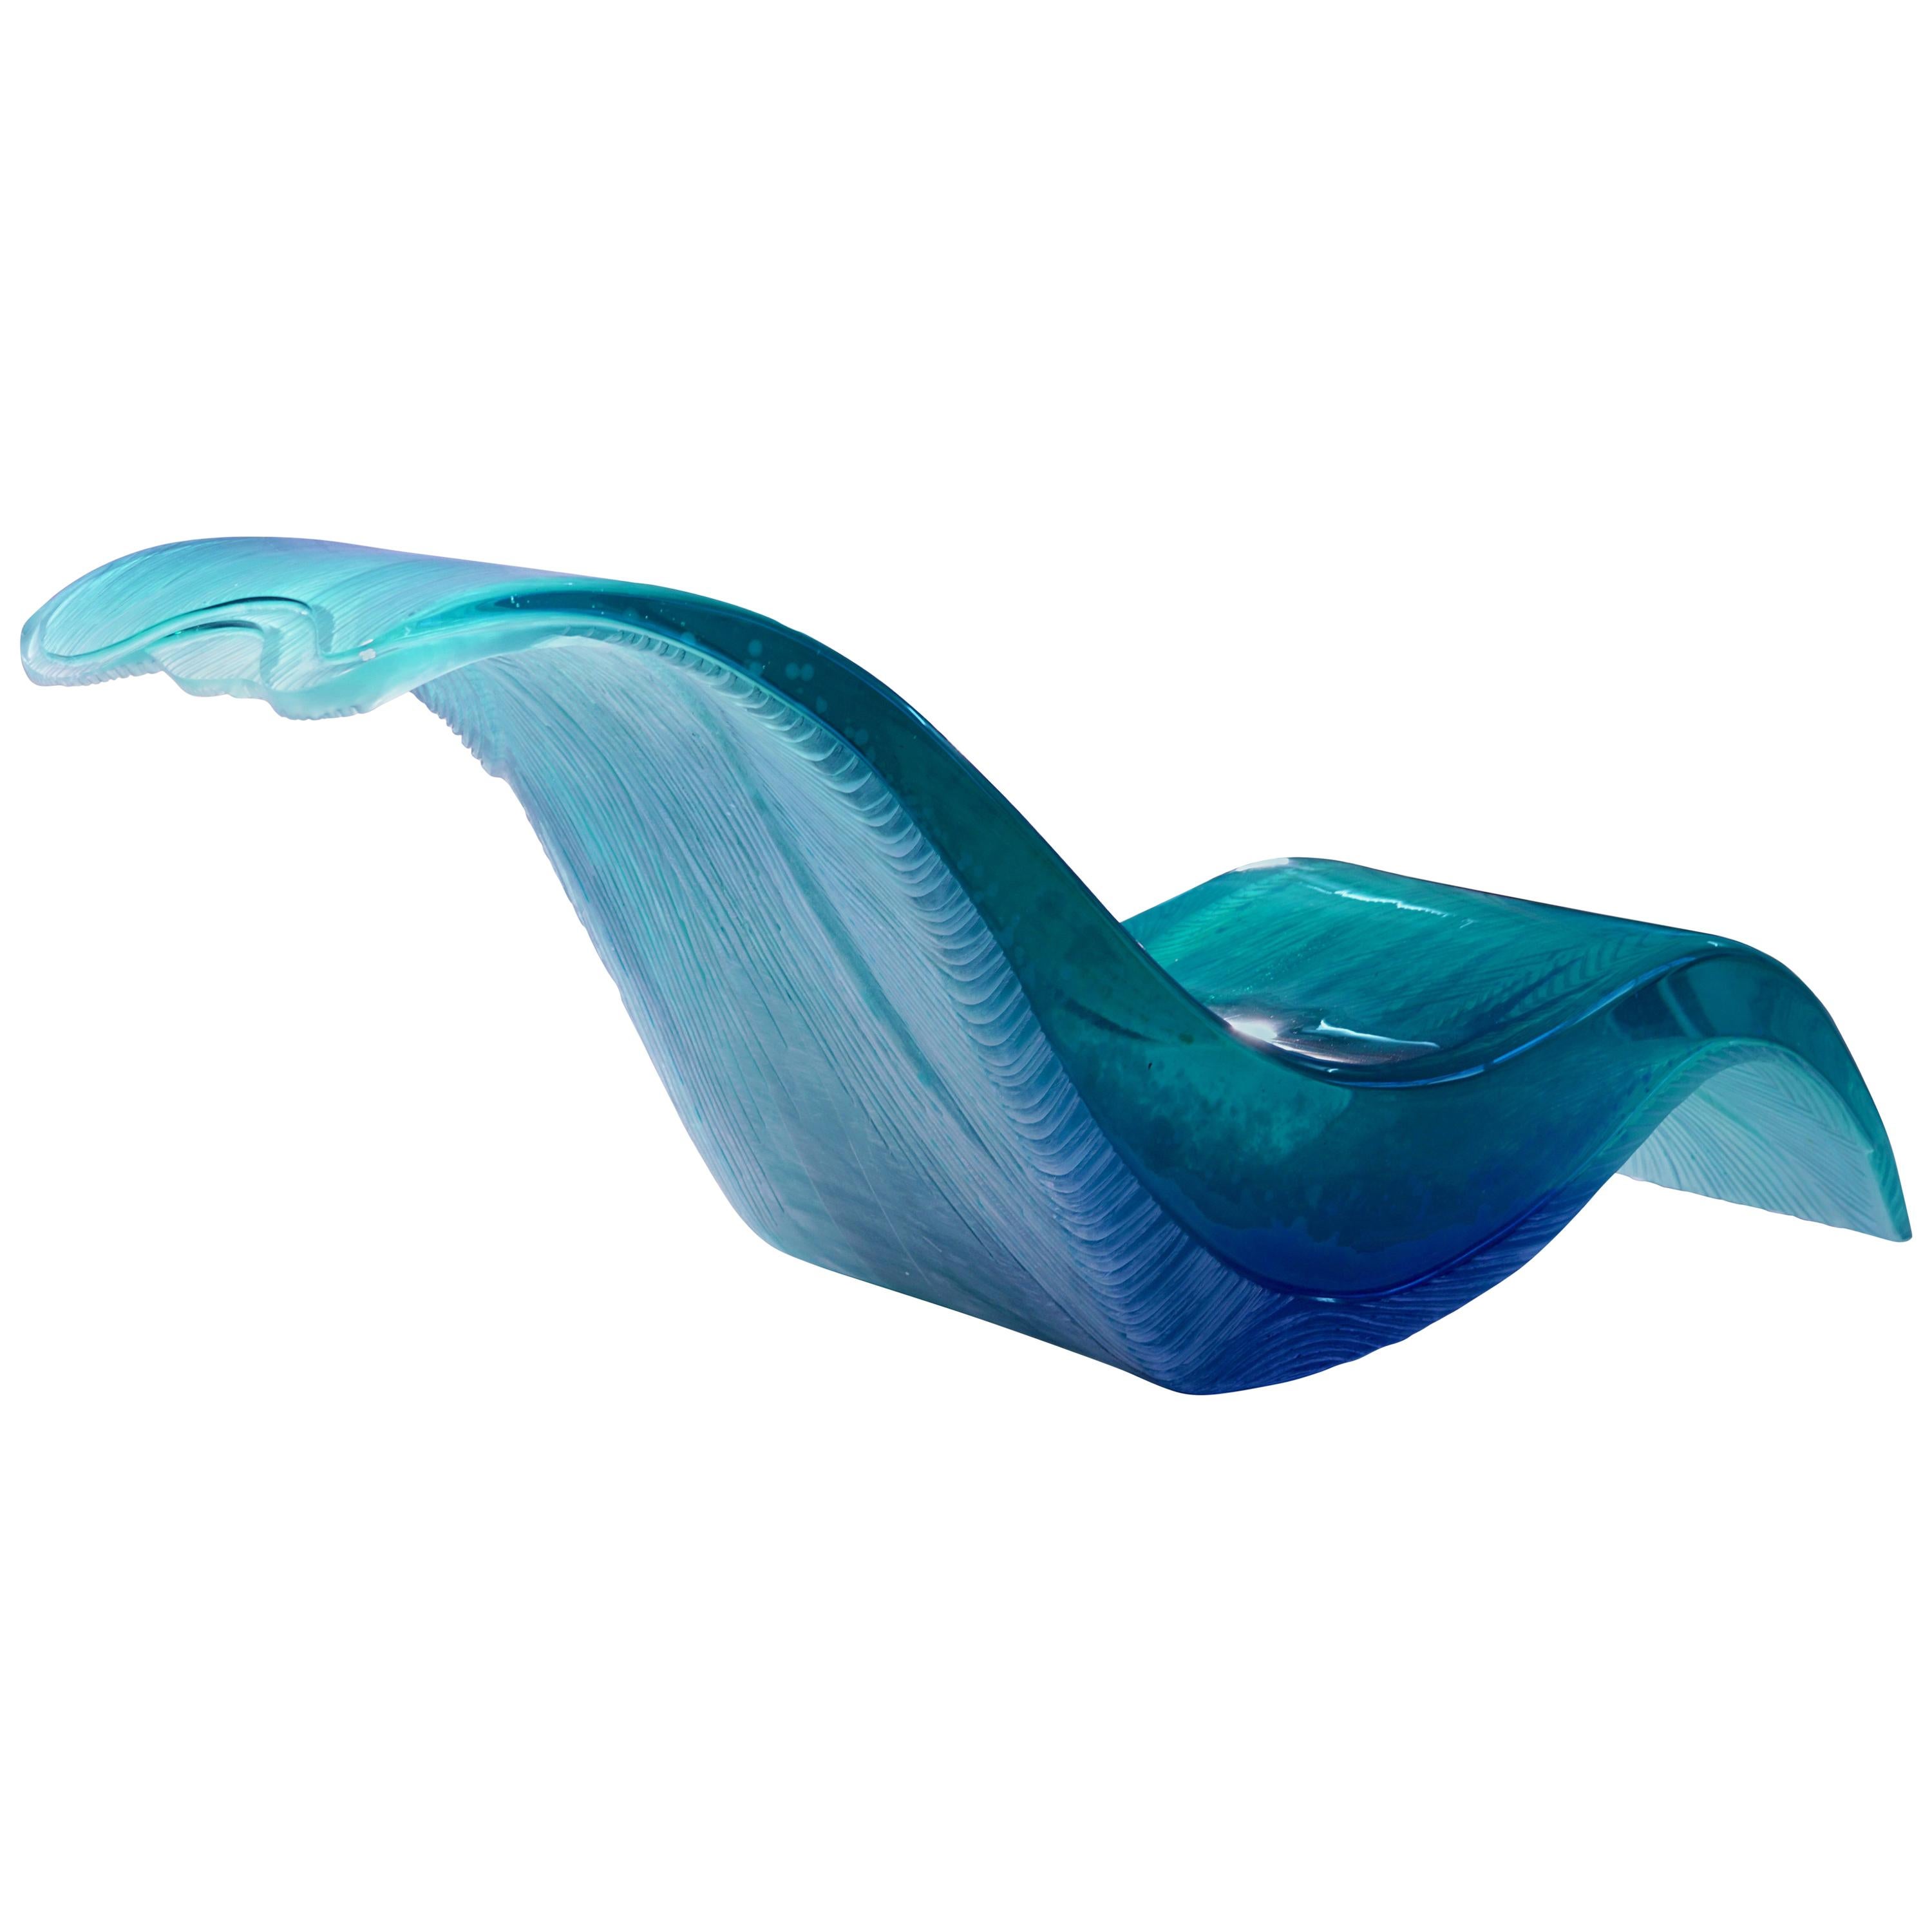 Wave Lounge by Eduard Locota. Turquoise-Blue Acrylic Glass Sculptural Design